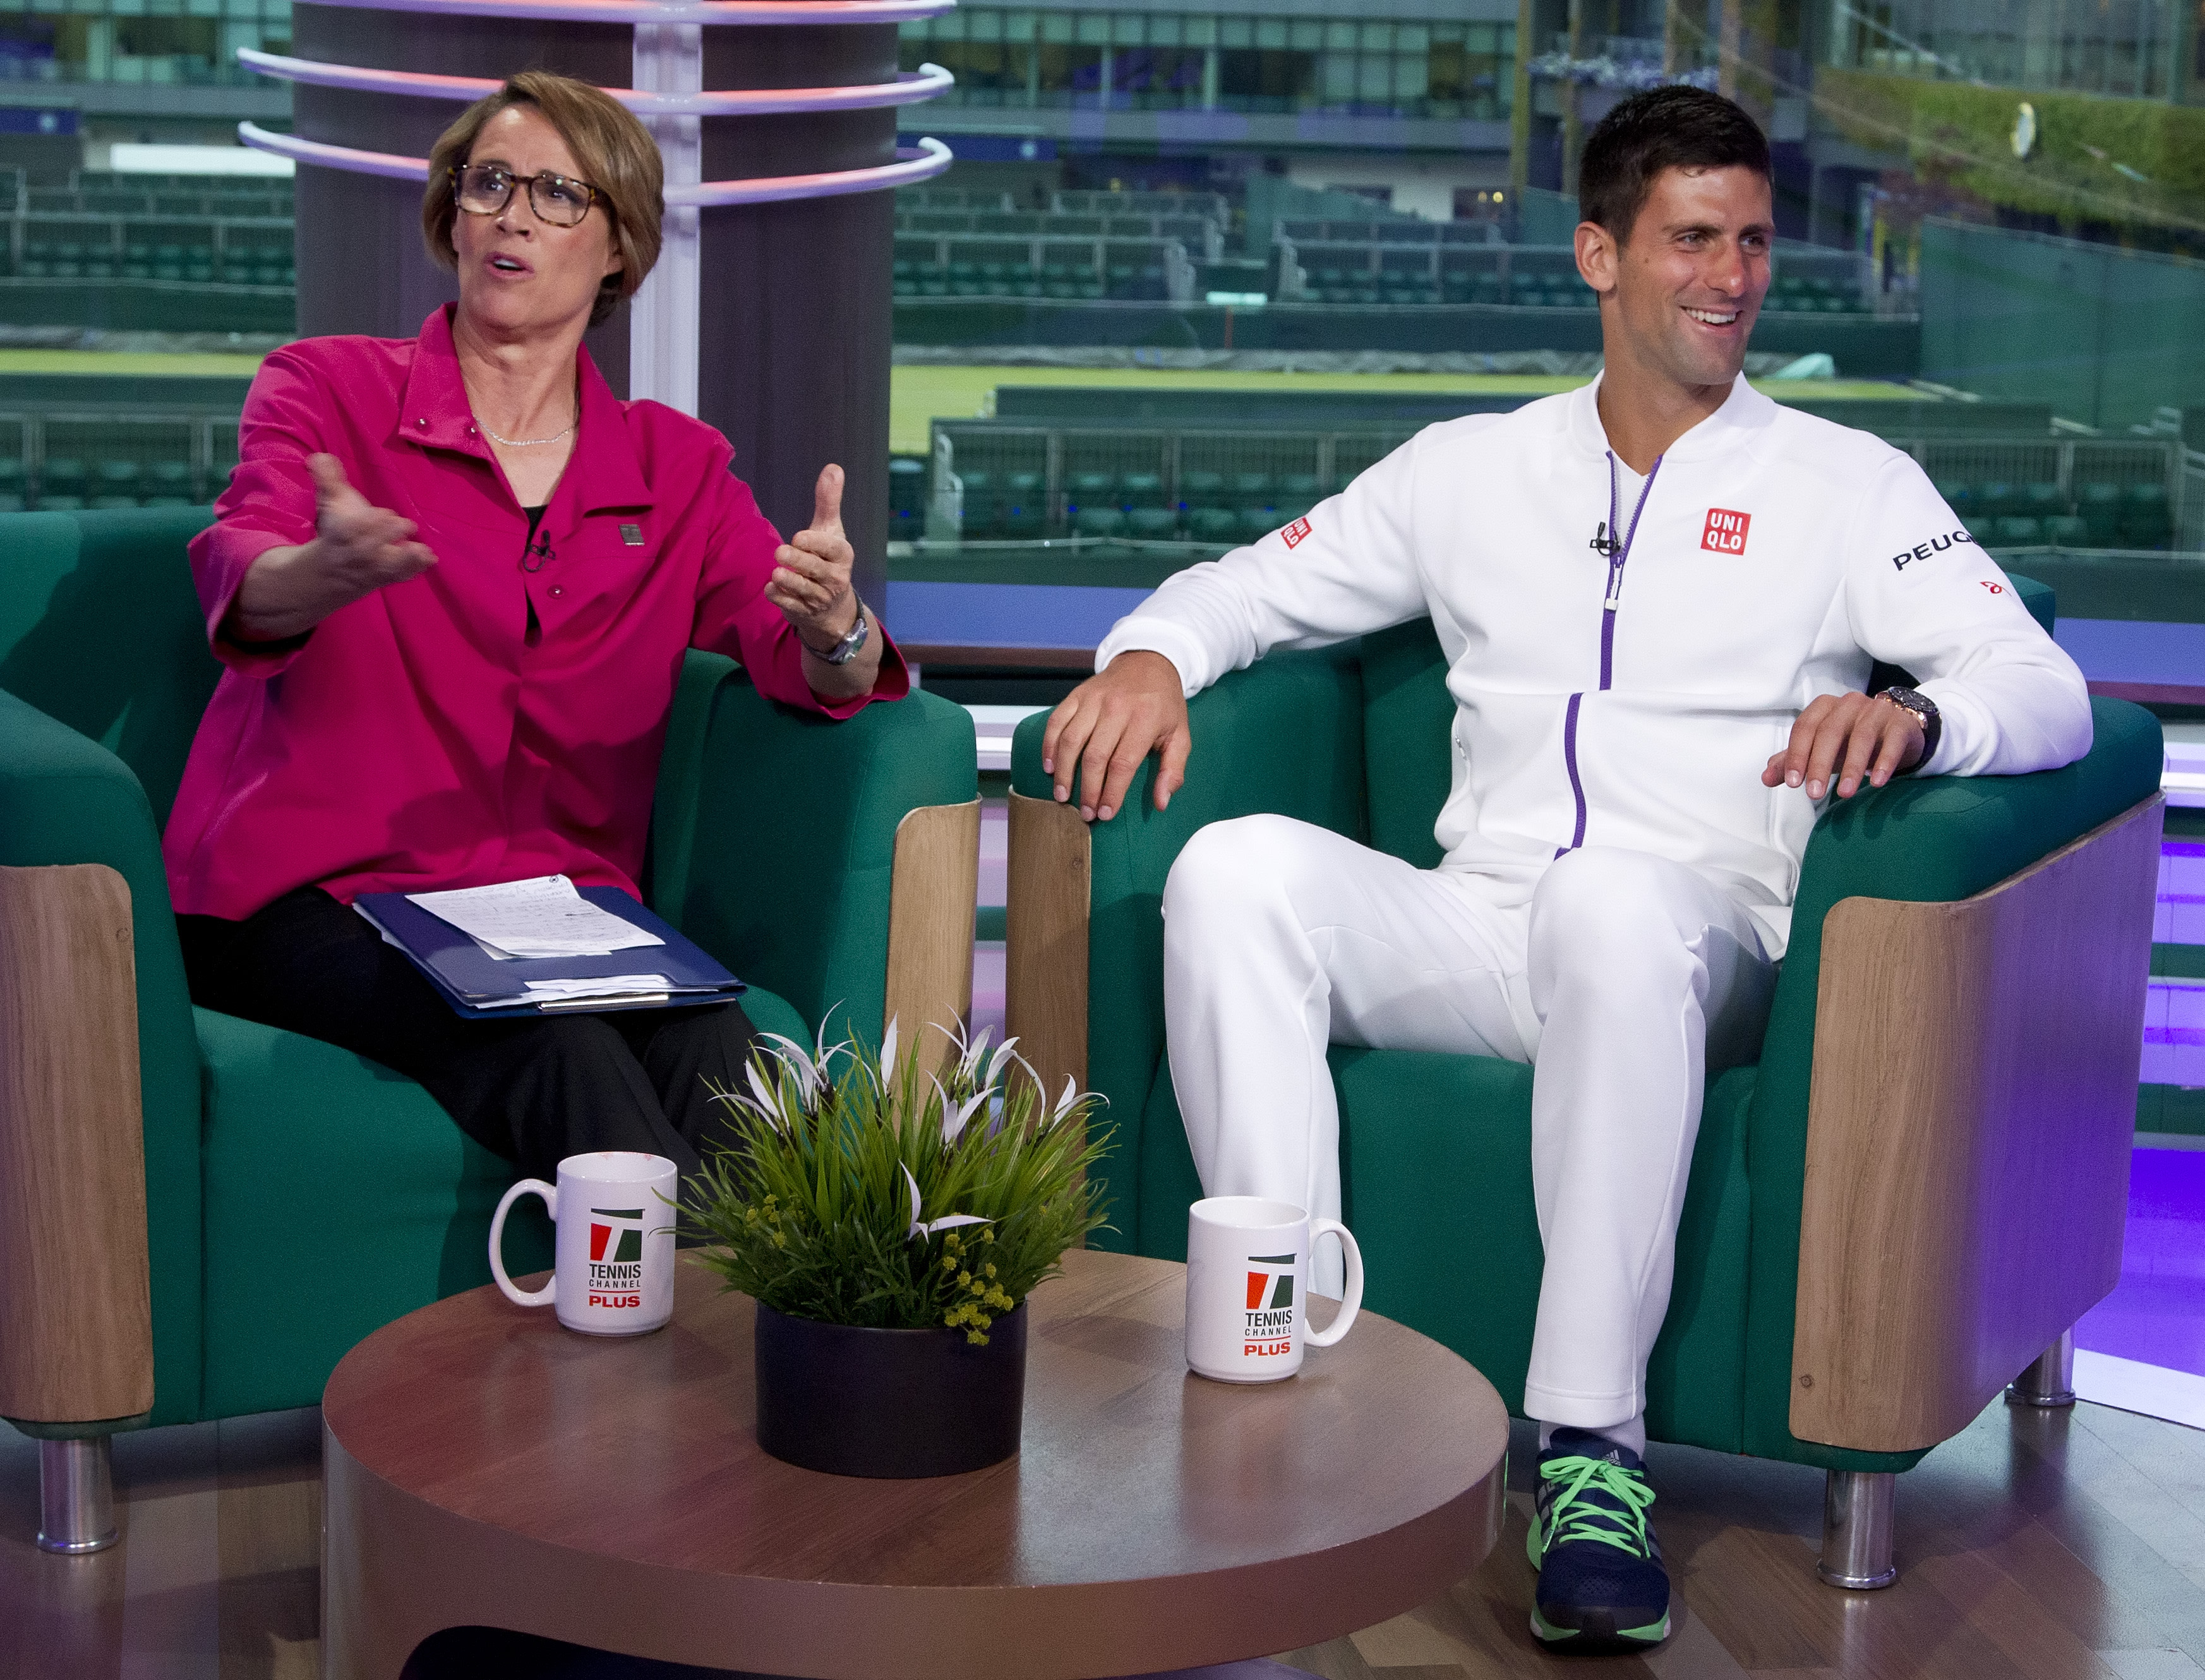 Tennis Channel to celebrate 20th anniversary milestone on May 15